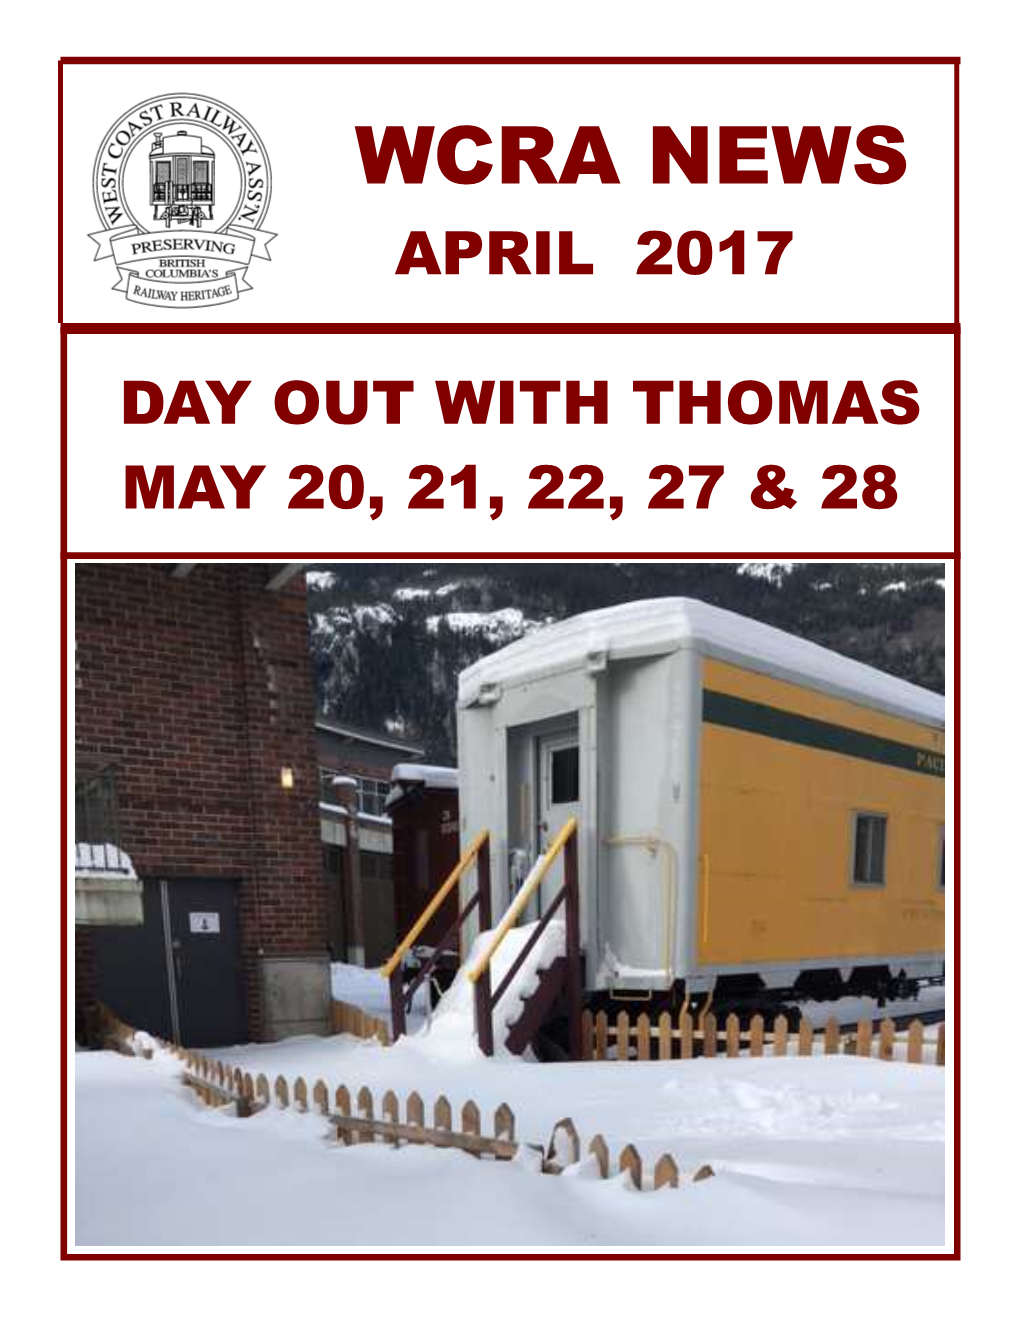 April 2017 Day out with Thomas May 20, 21, 22, 27 & 28